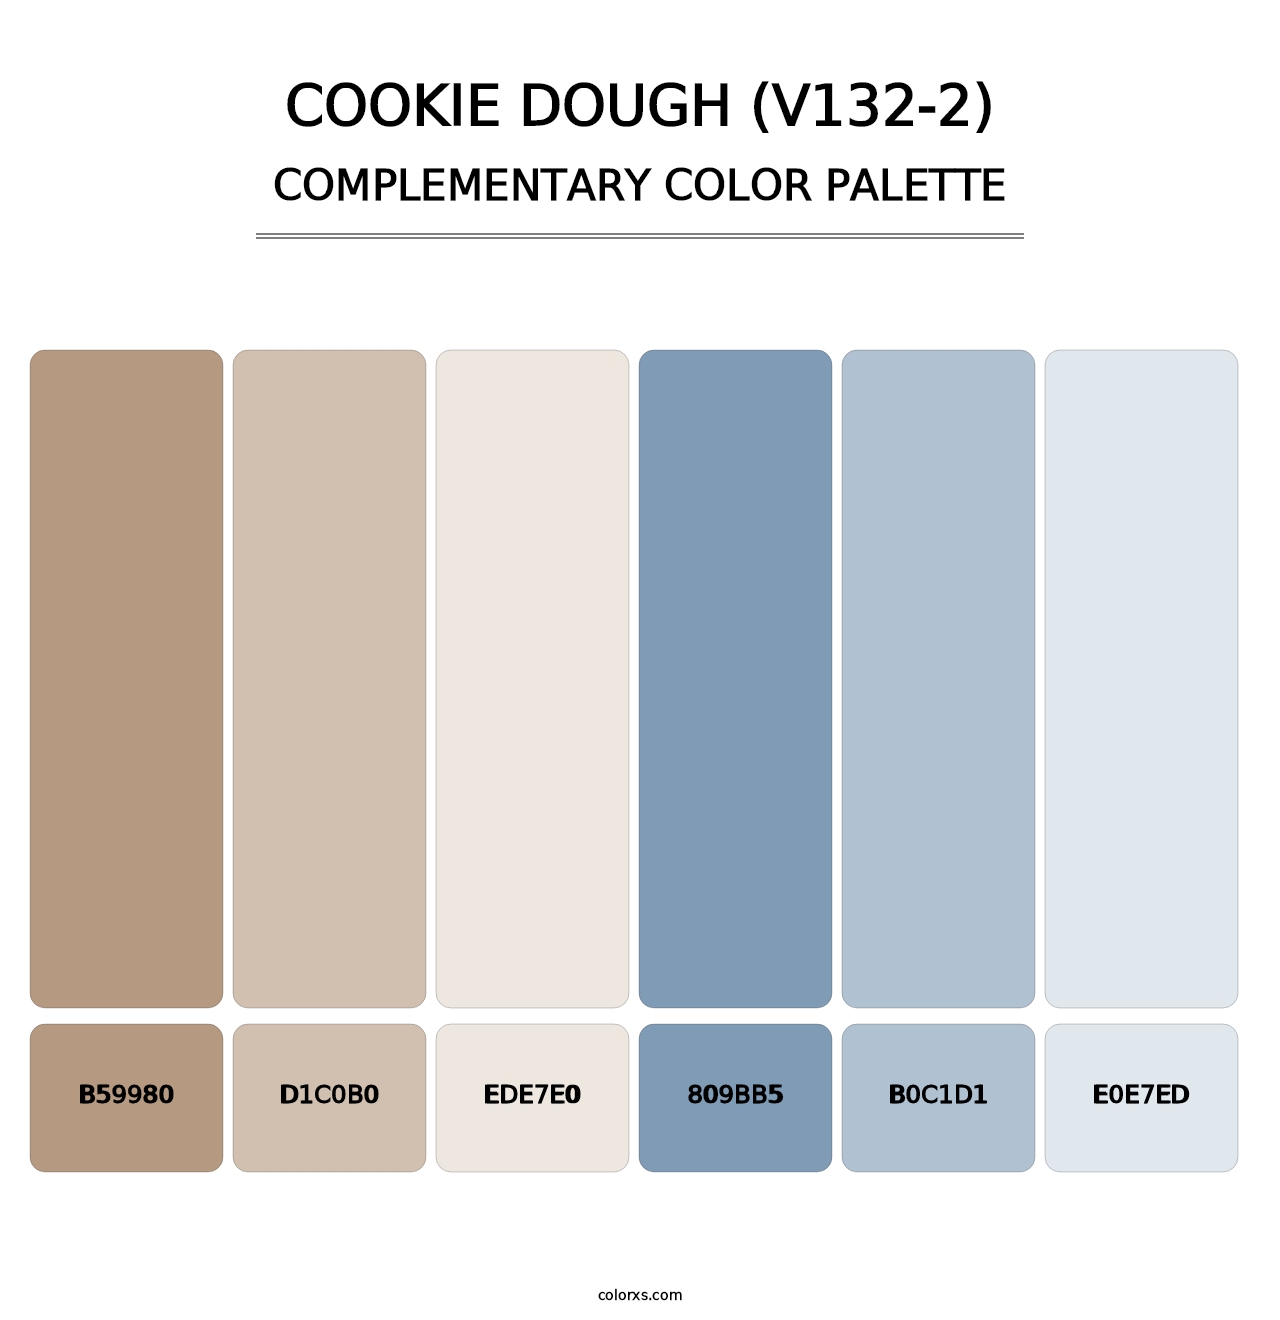 Cookie Dough (V132-2) - Complementary Color Palette